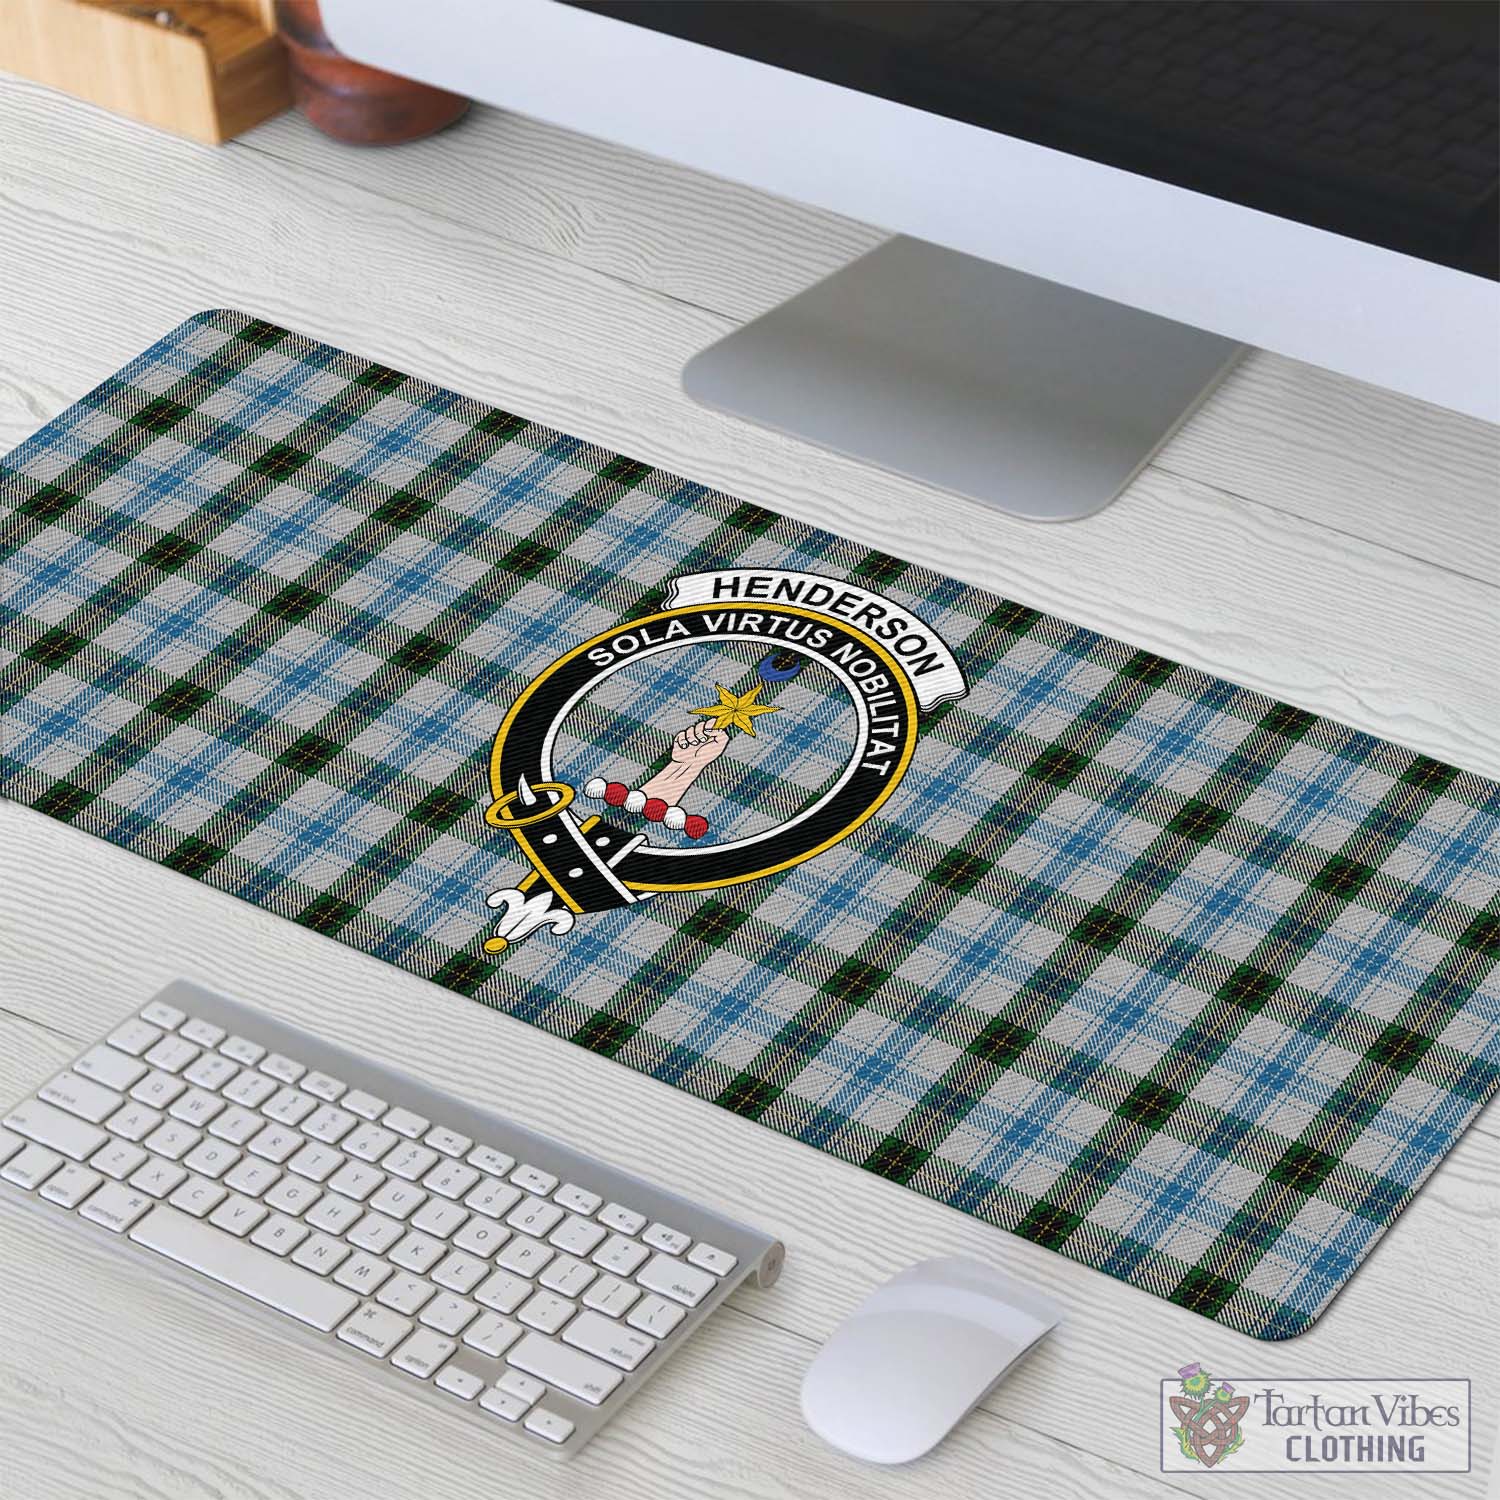 Tartan Vibes Clothing Henderson Dress Tartan Mouse Pad with Family Crest